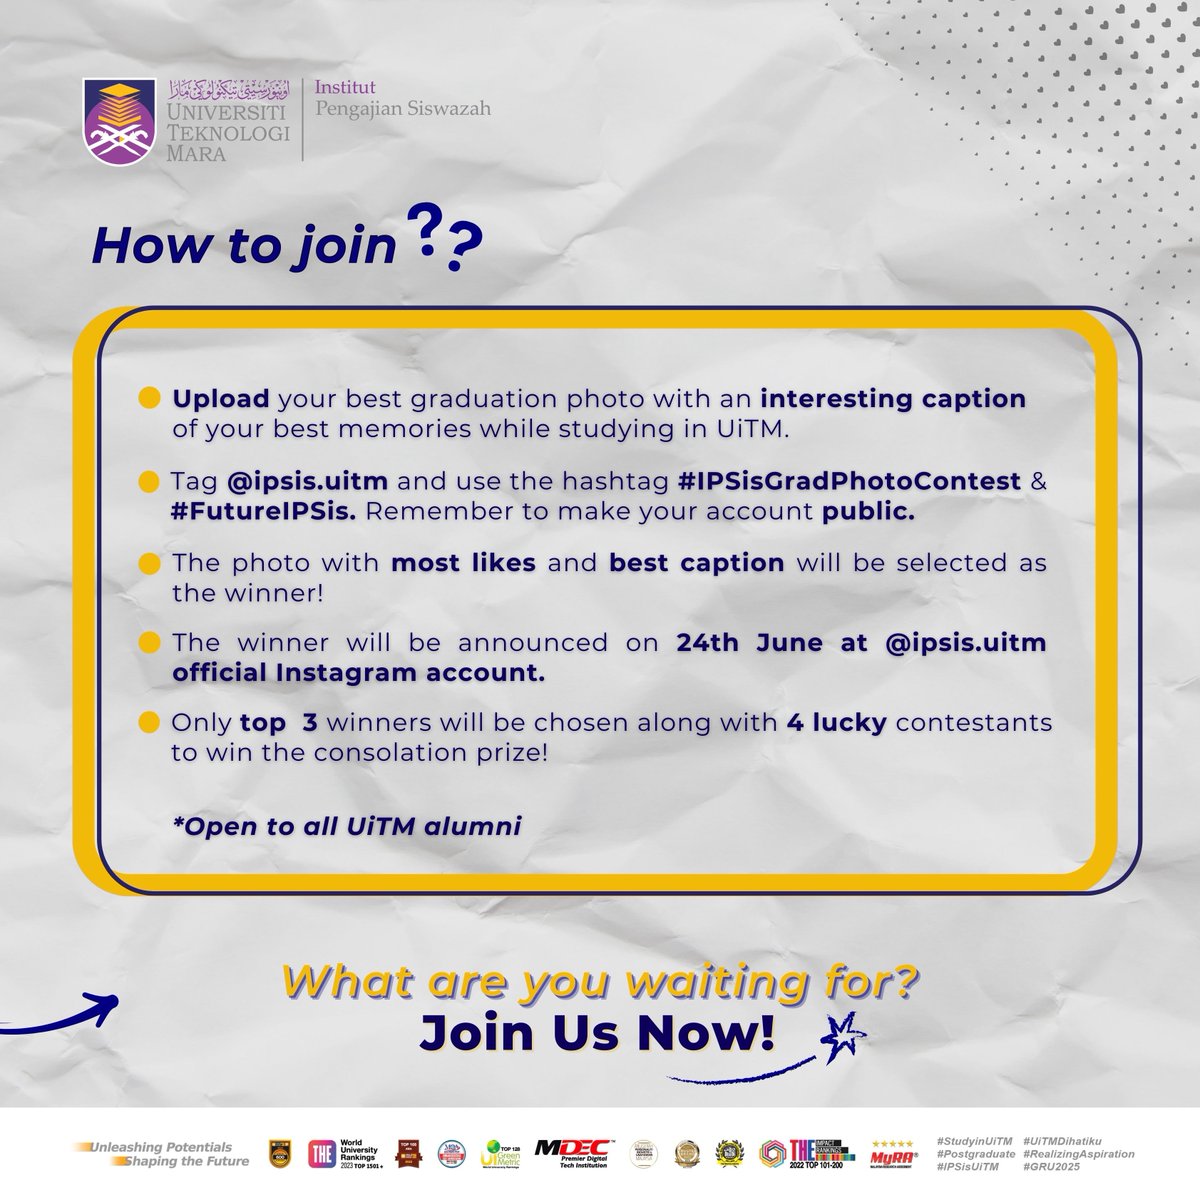 Join the contest and win a prize! Follow the instructions to participate and be a winner! 😉

Visit study.uitm.edu.my to learn more about postgraduate studies at UiTM. 📌

#UiTMDihatiku #PostGraduate #IPSisUiTM #StudyInUiTM #UniversitiTeknologiMara #FutureIPSis